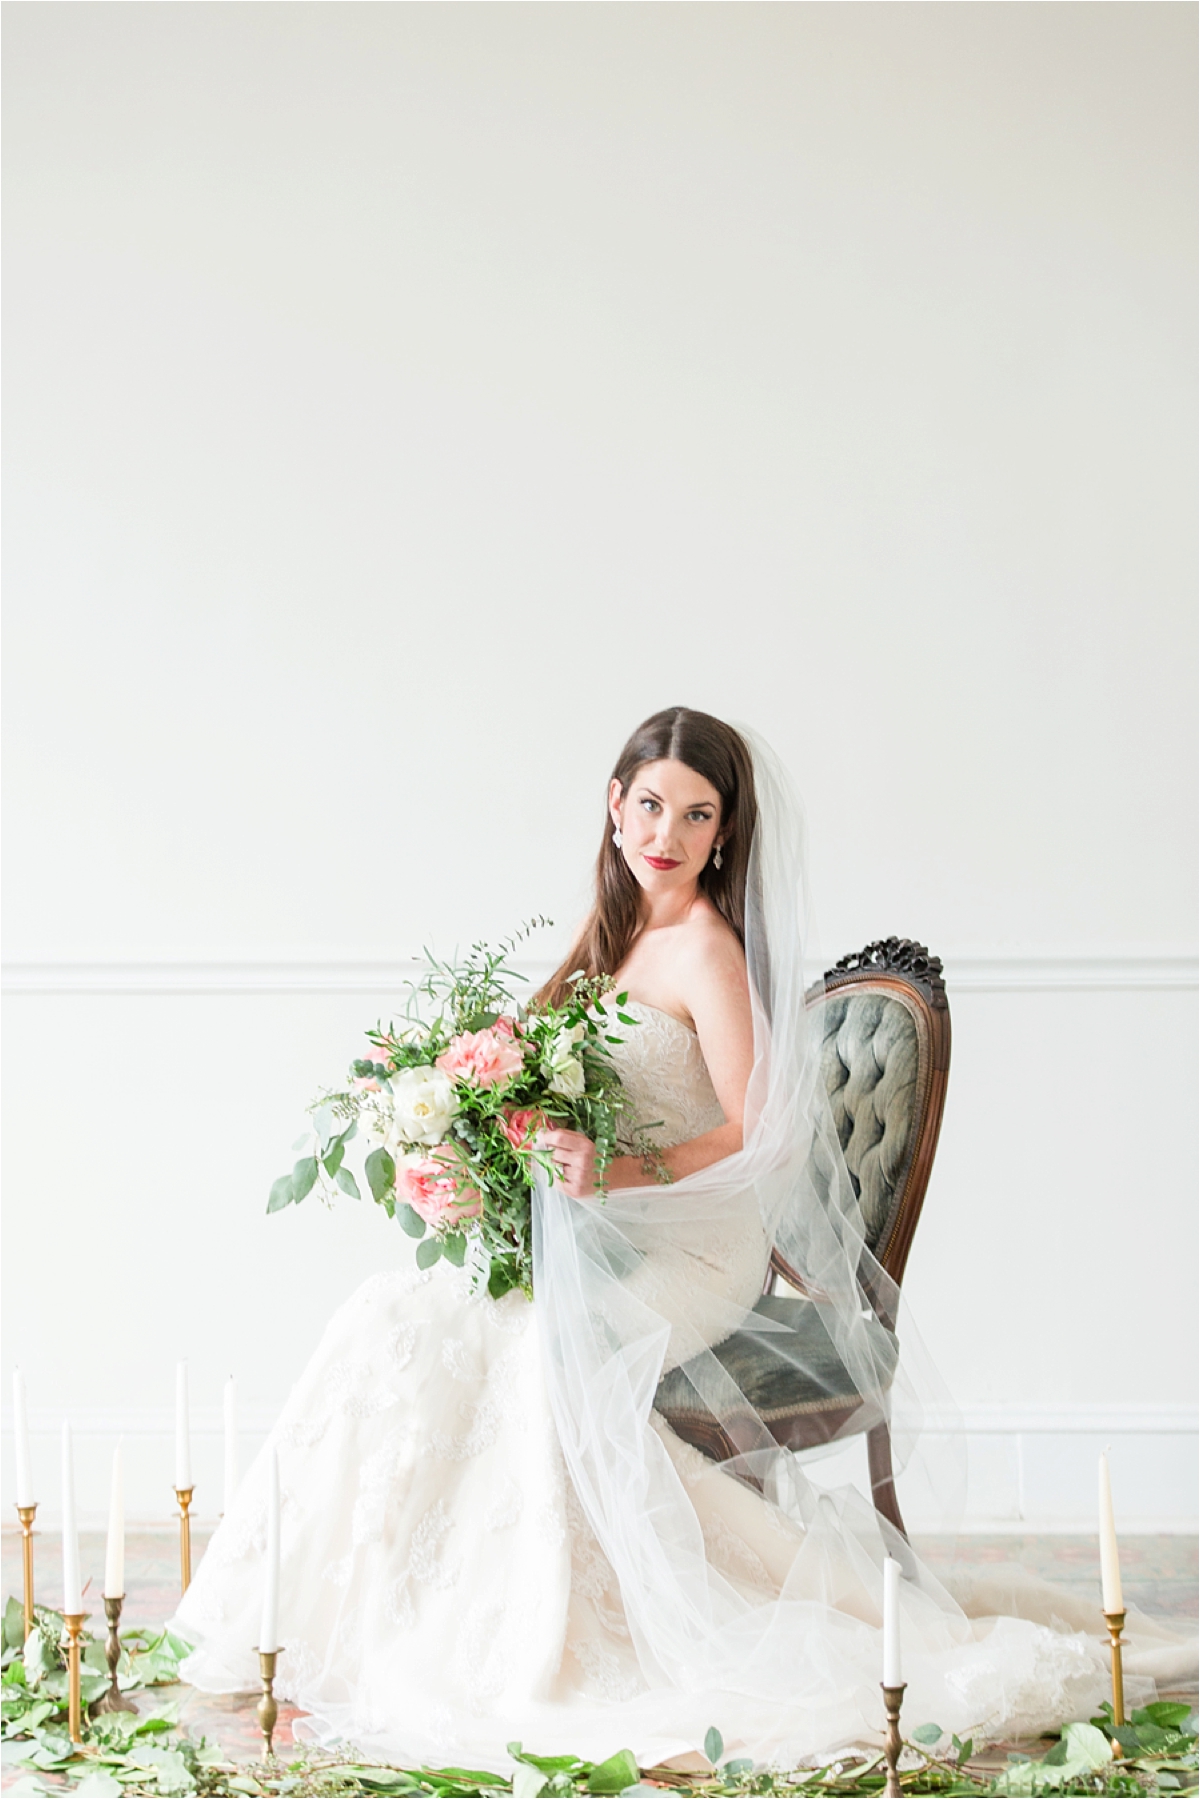 Bridal-Portraits-the Pillars-Mobile, Alabama-Dragonfly-Photography-vintage-antique-chair